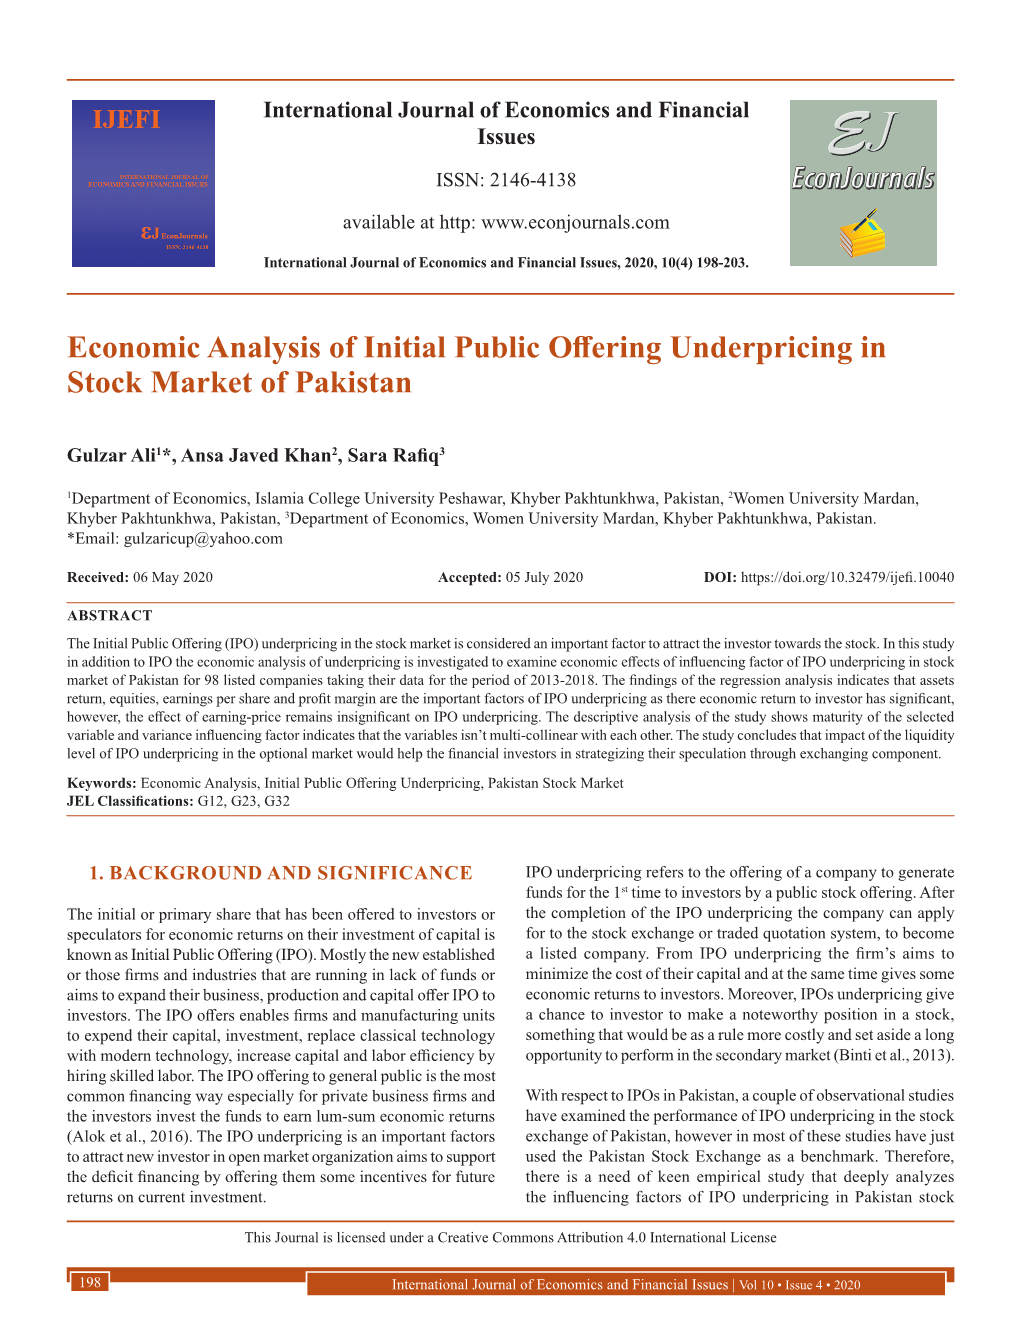 Economic Analysis of Initial Public Offering Underpricing in Stock Market of Pakistan